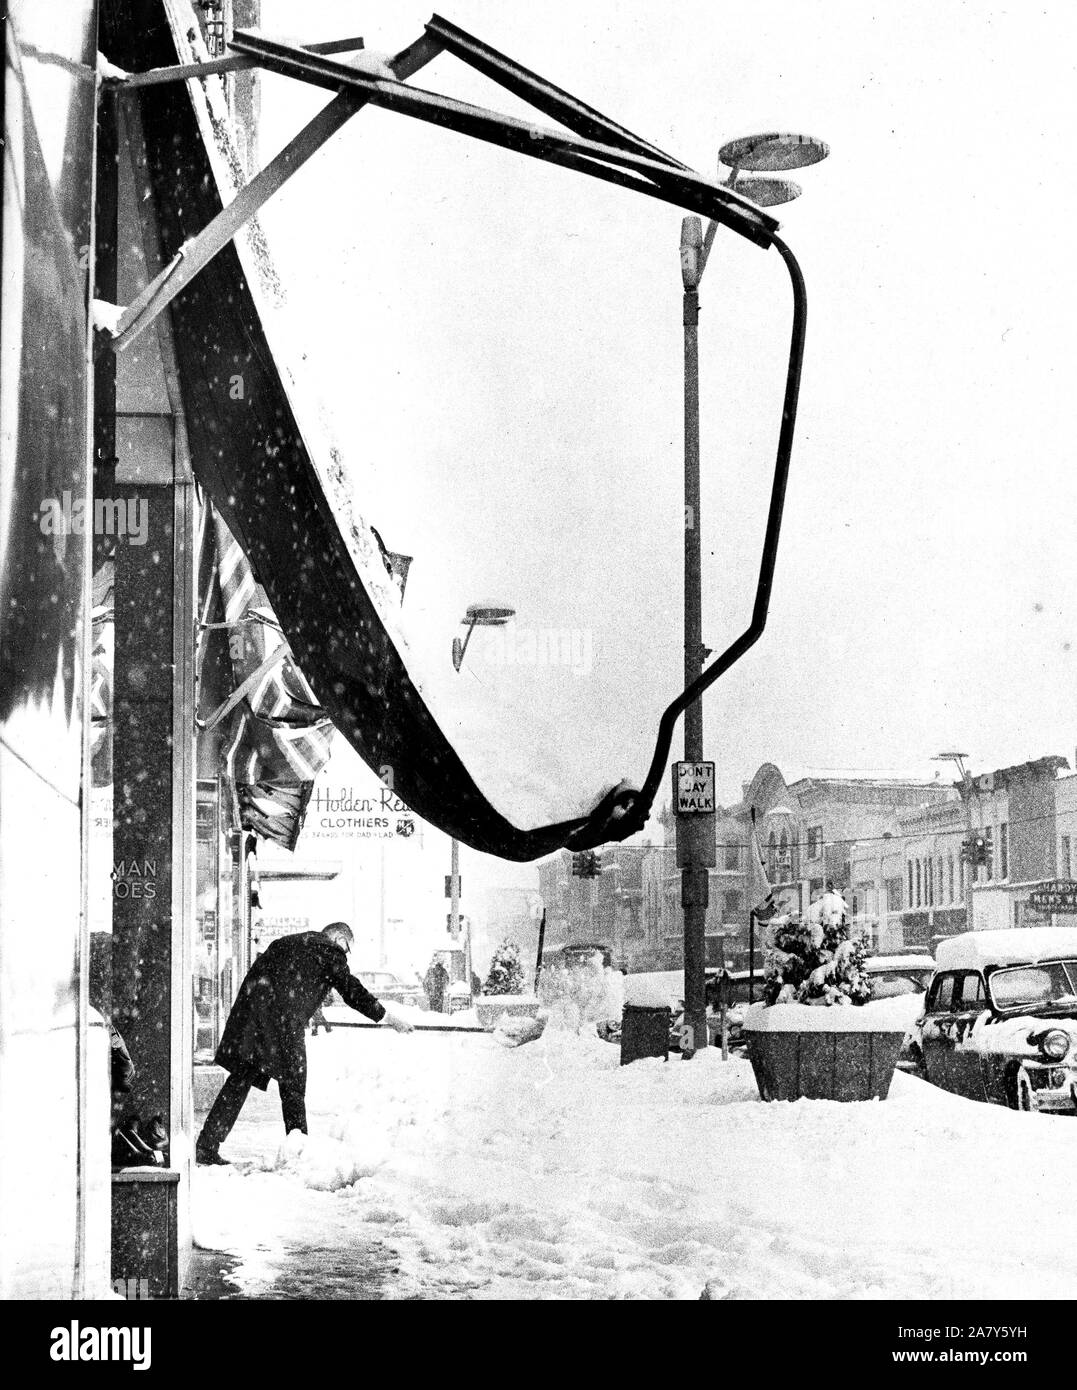 Man Shoveling Snow on City Sidewalk; Collapsed Awning in Foreground November 1966 Stock Photo